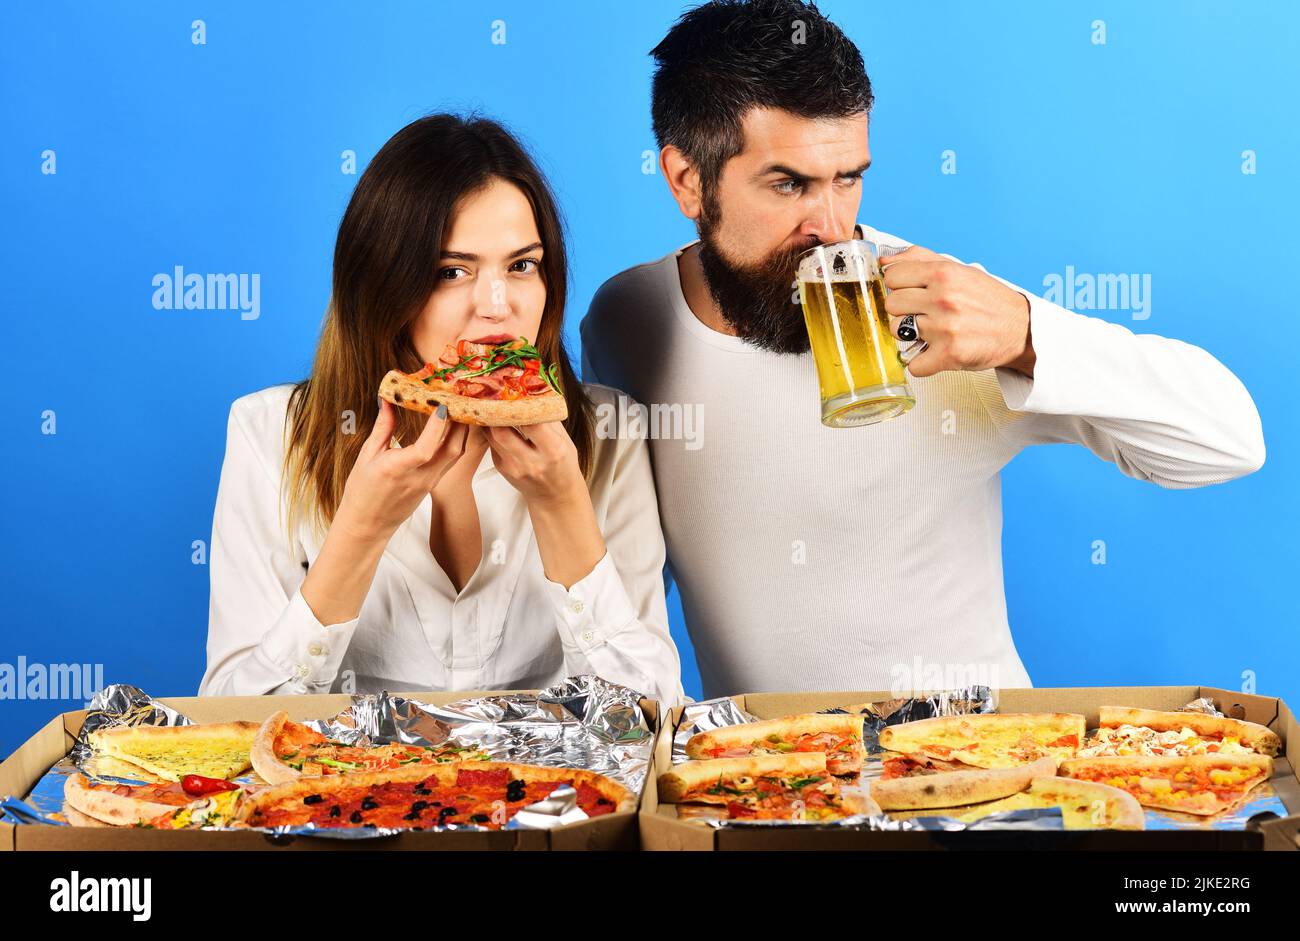 Pizza time. Beautiful young couple in casual clothes eating pizza and drinking beer together. Stock Photo